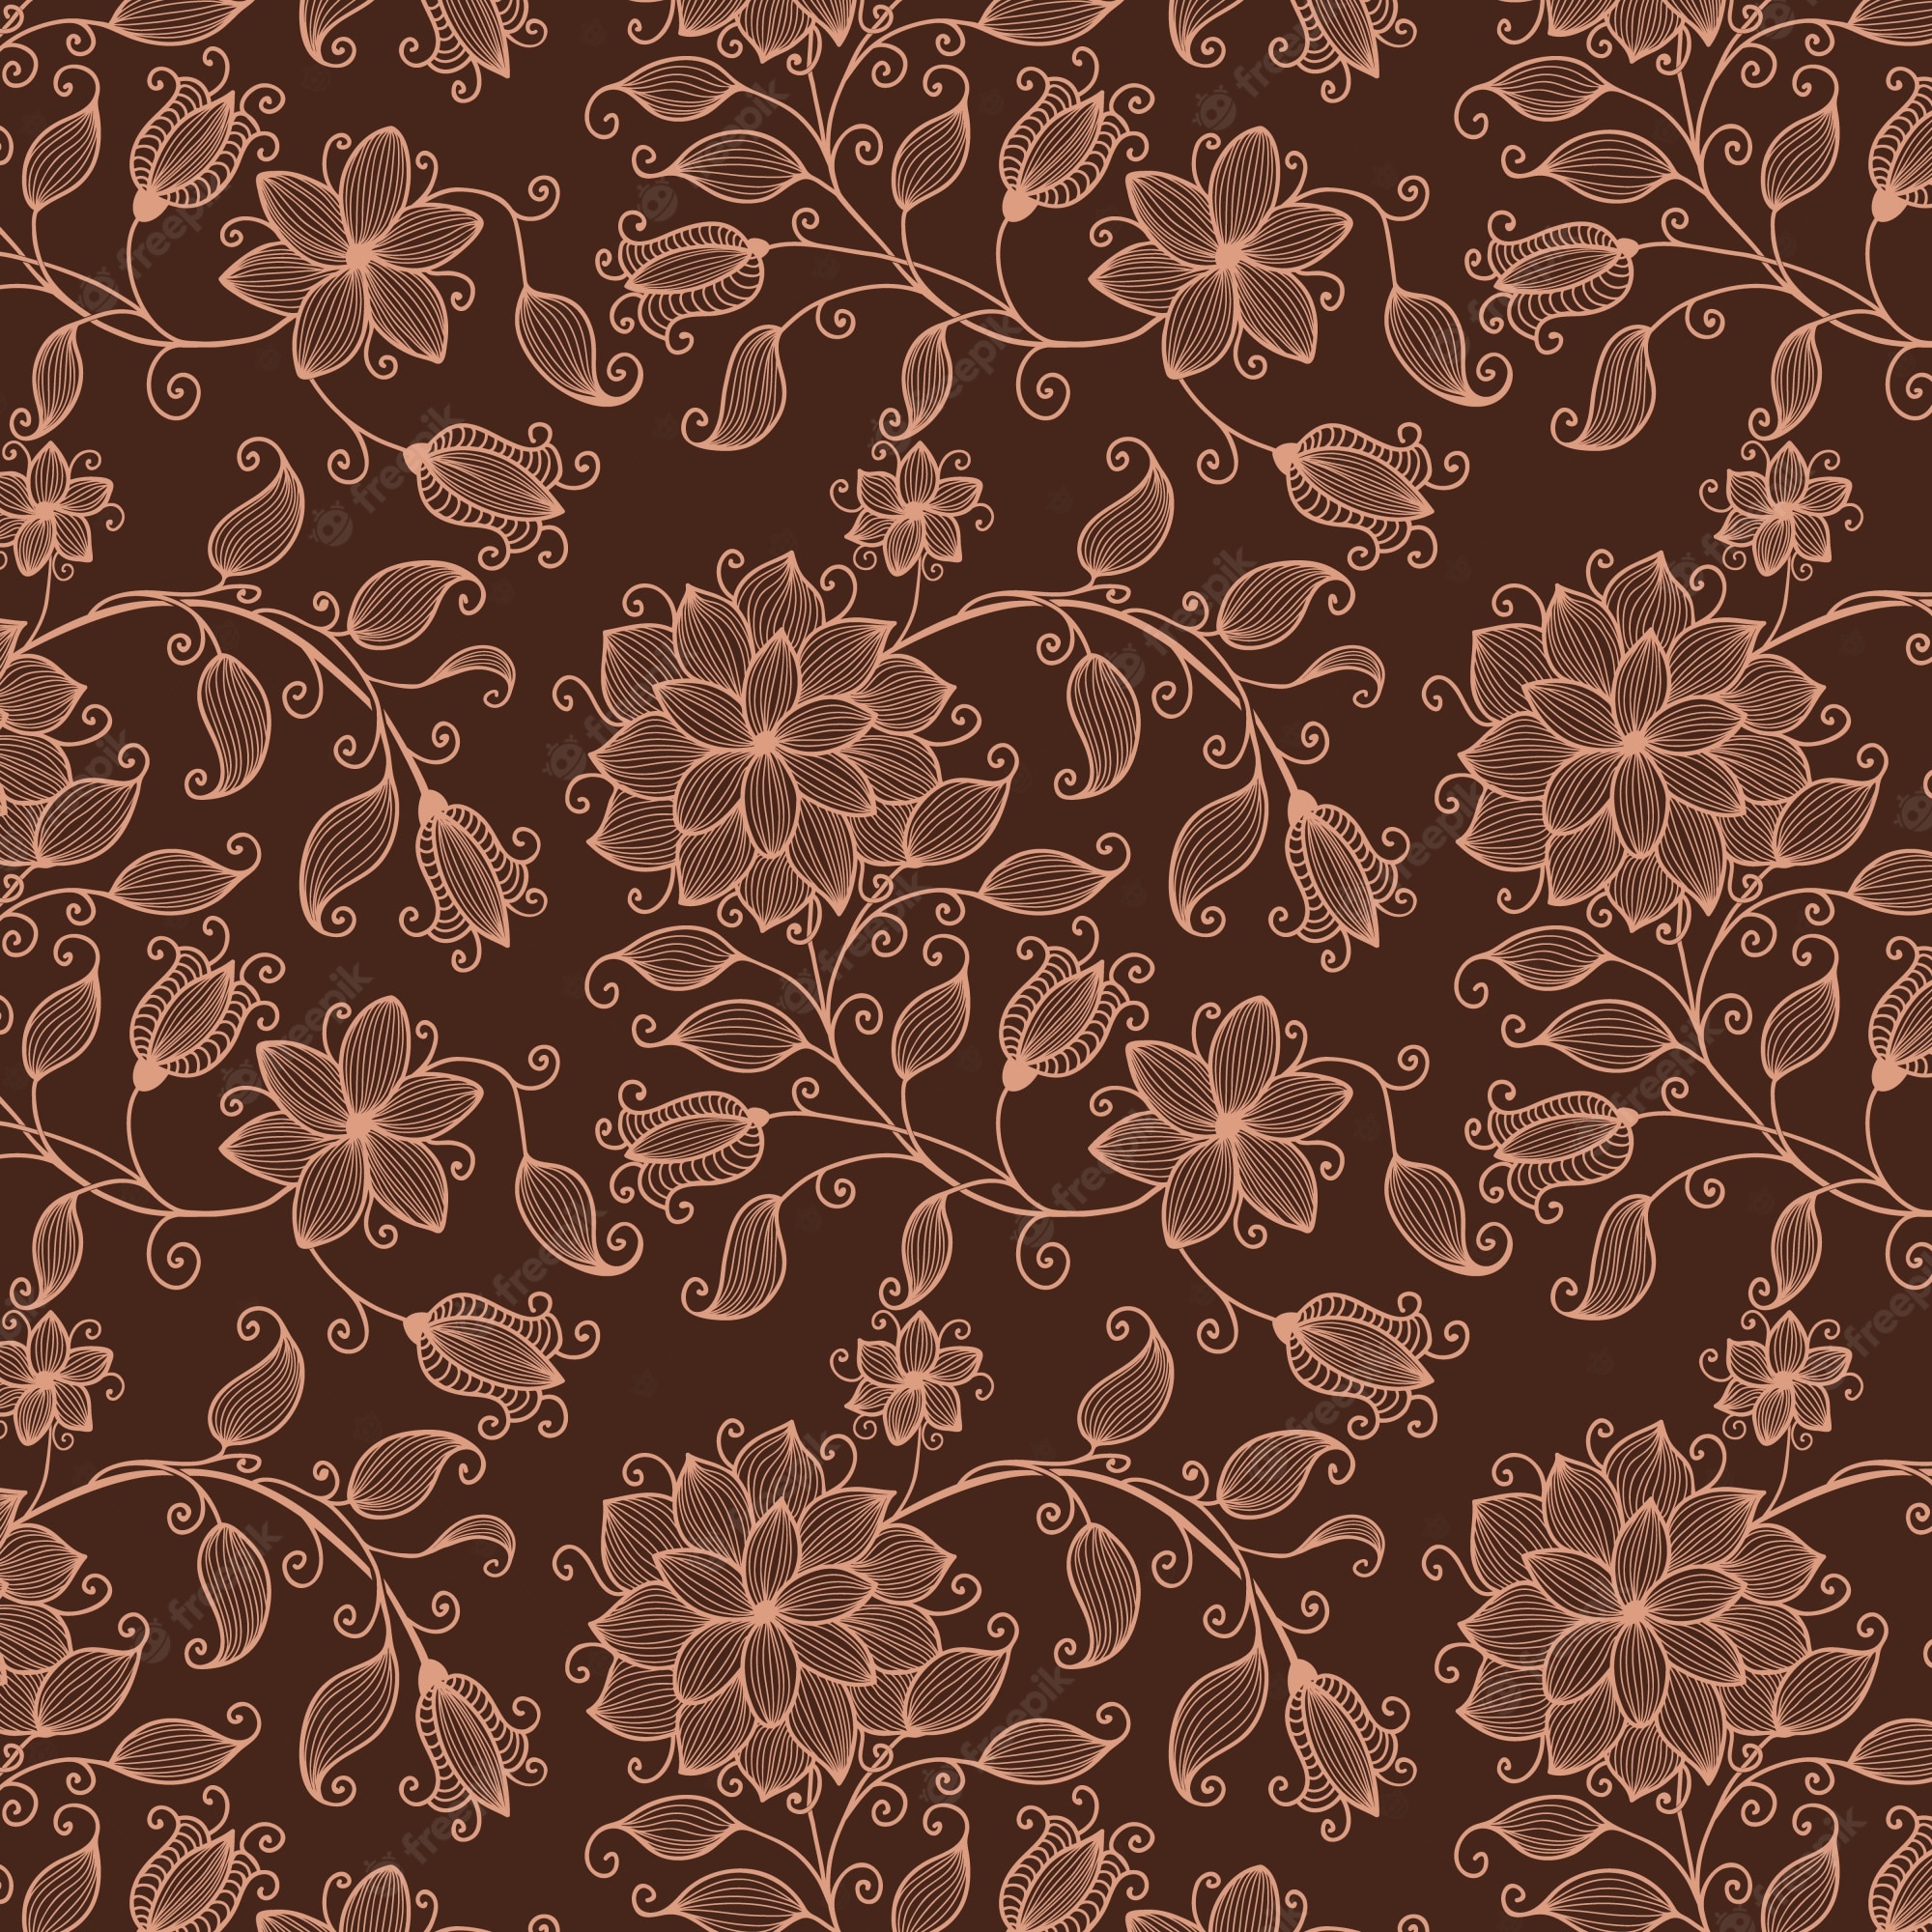 Floral Texture Wallpapers